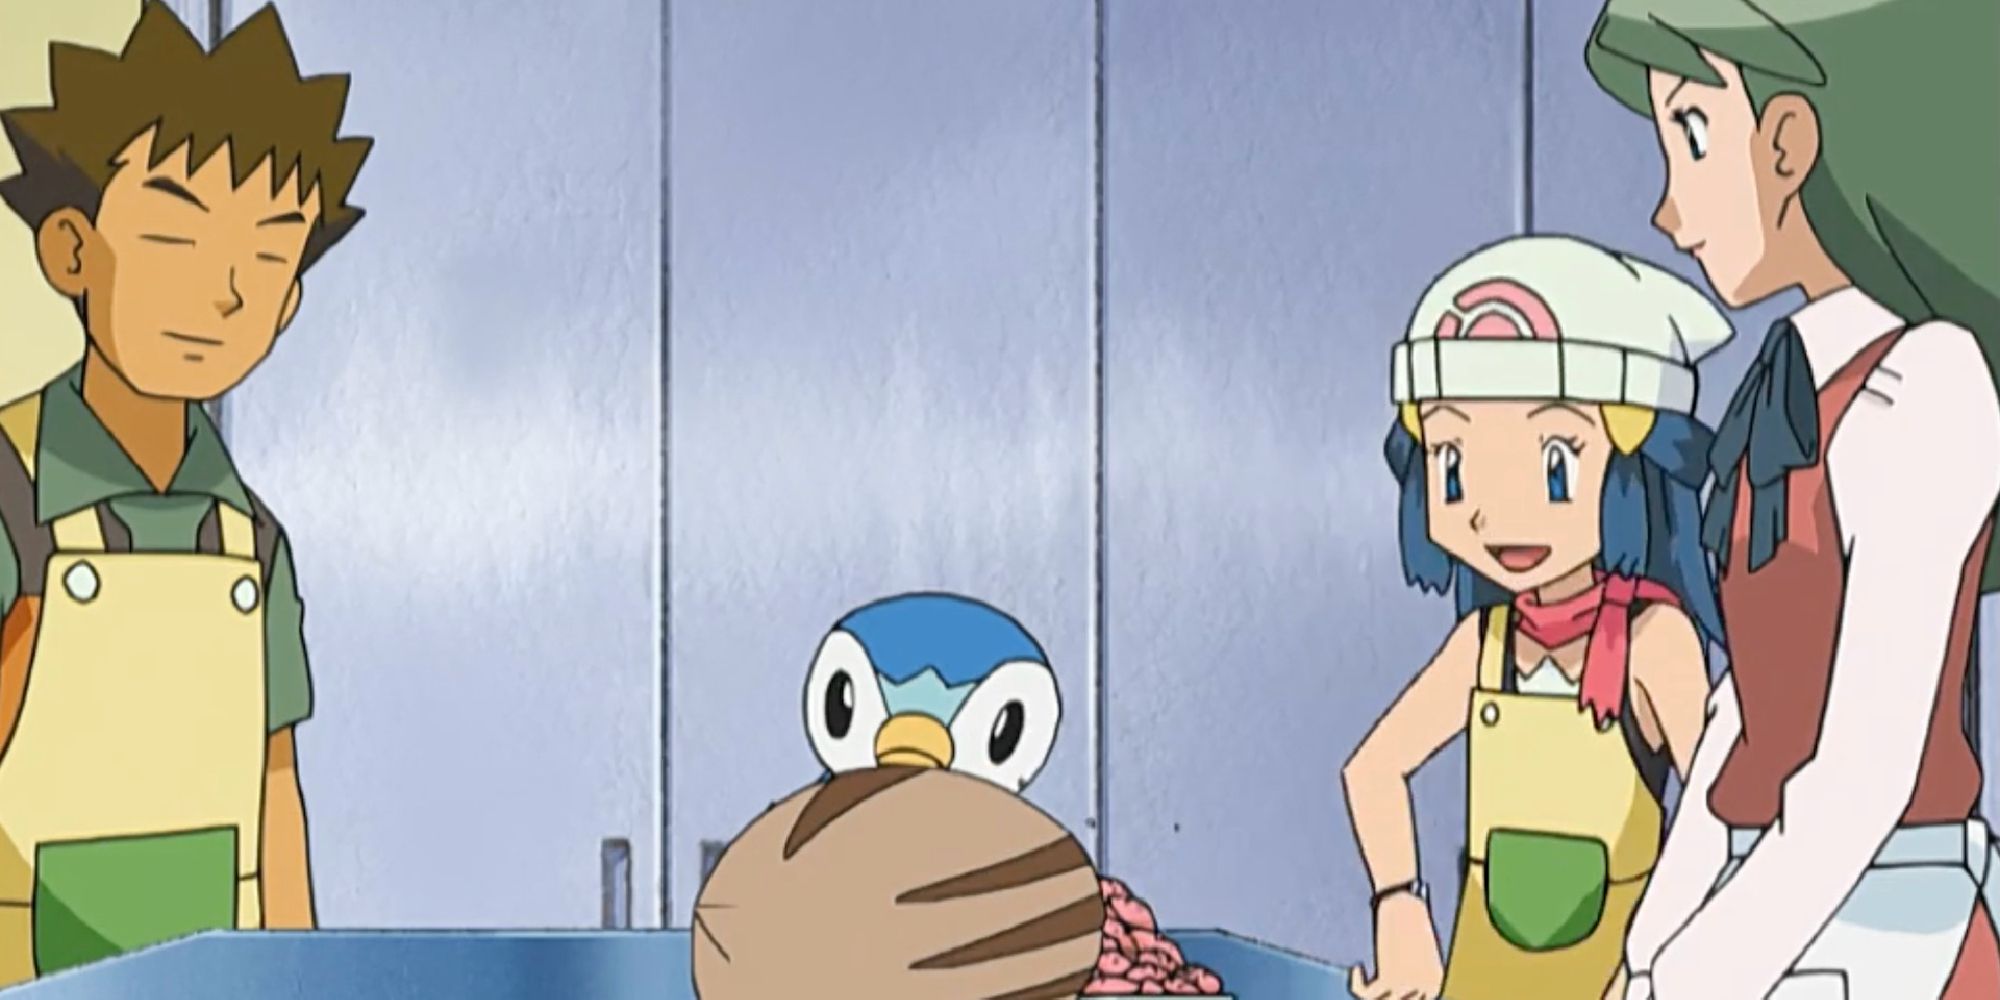 Dawn and Brock feeding Swinub while an angry Piplup watches